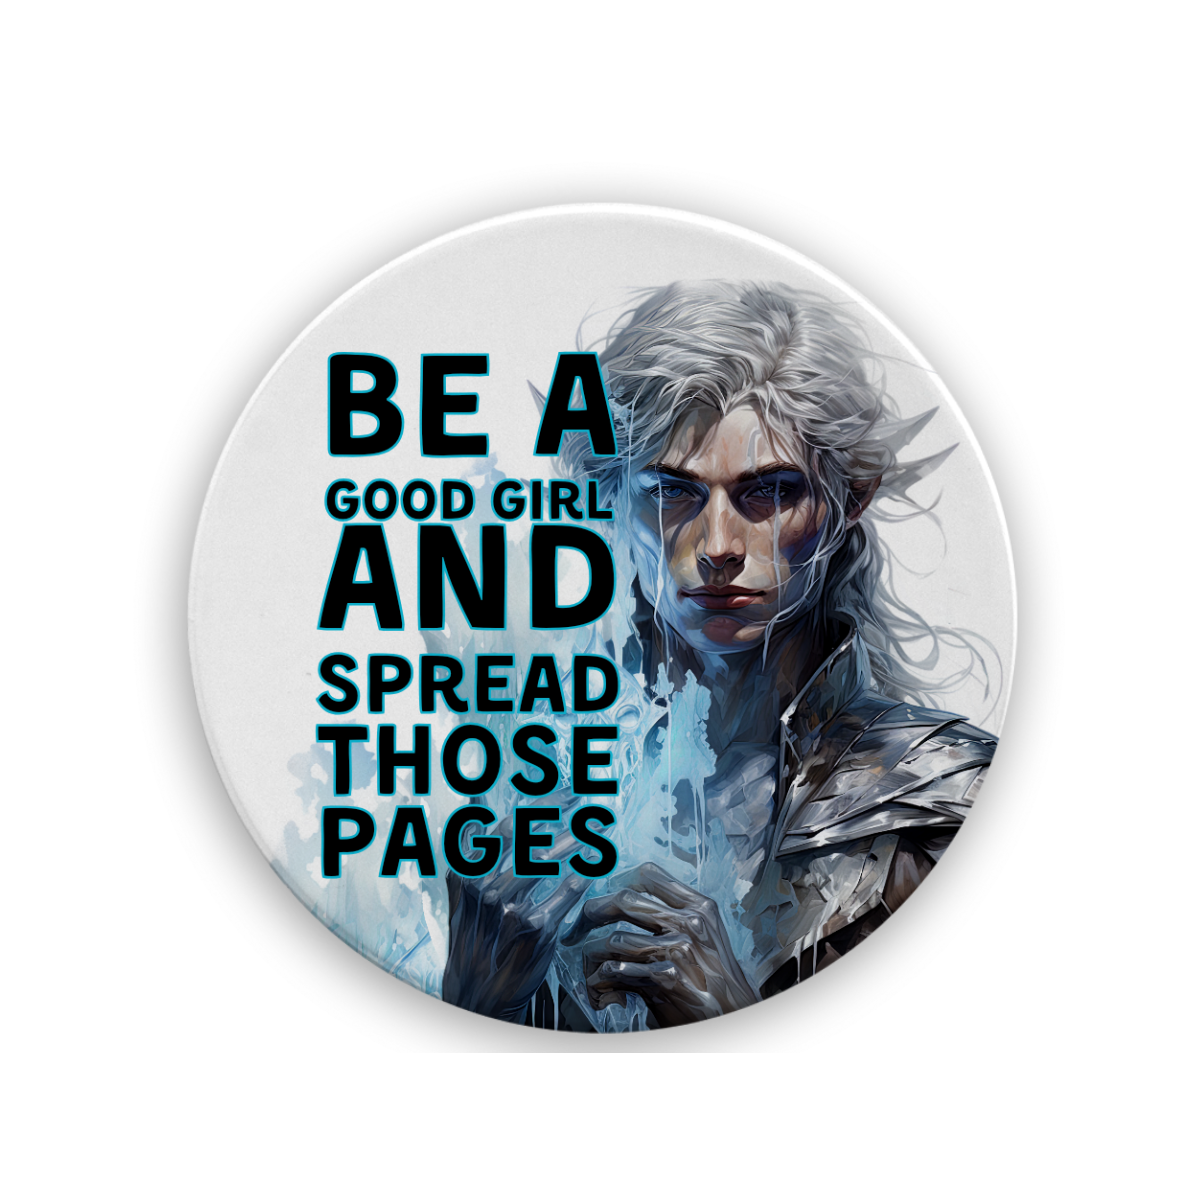 Be A Good Girl And Spread Those Pages (Dark Elf) | Drink Coaster - The Pretty Things.ca